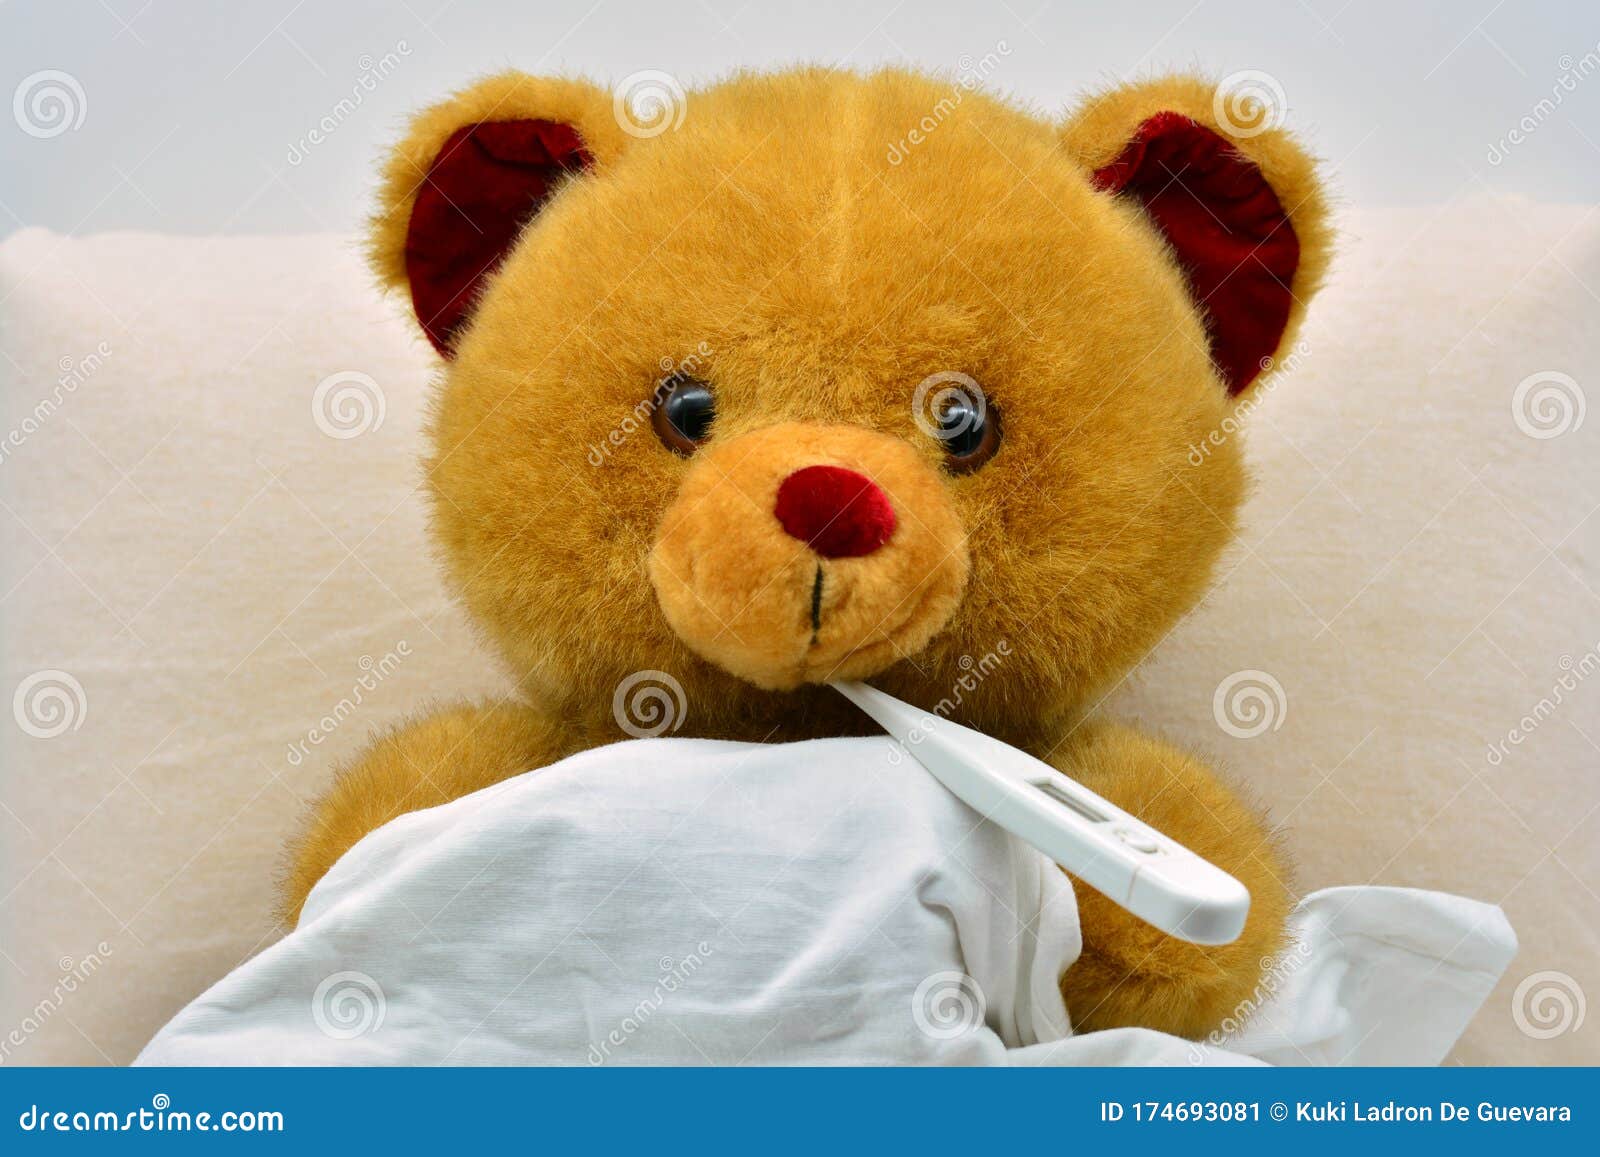 teddy bear in bed, sick with fever